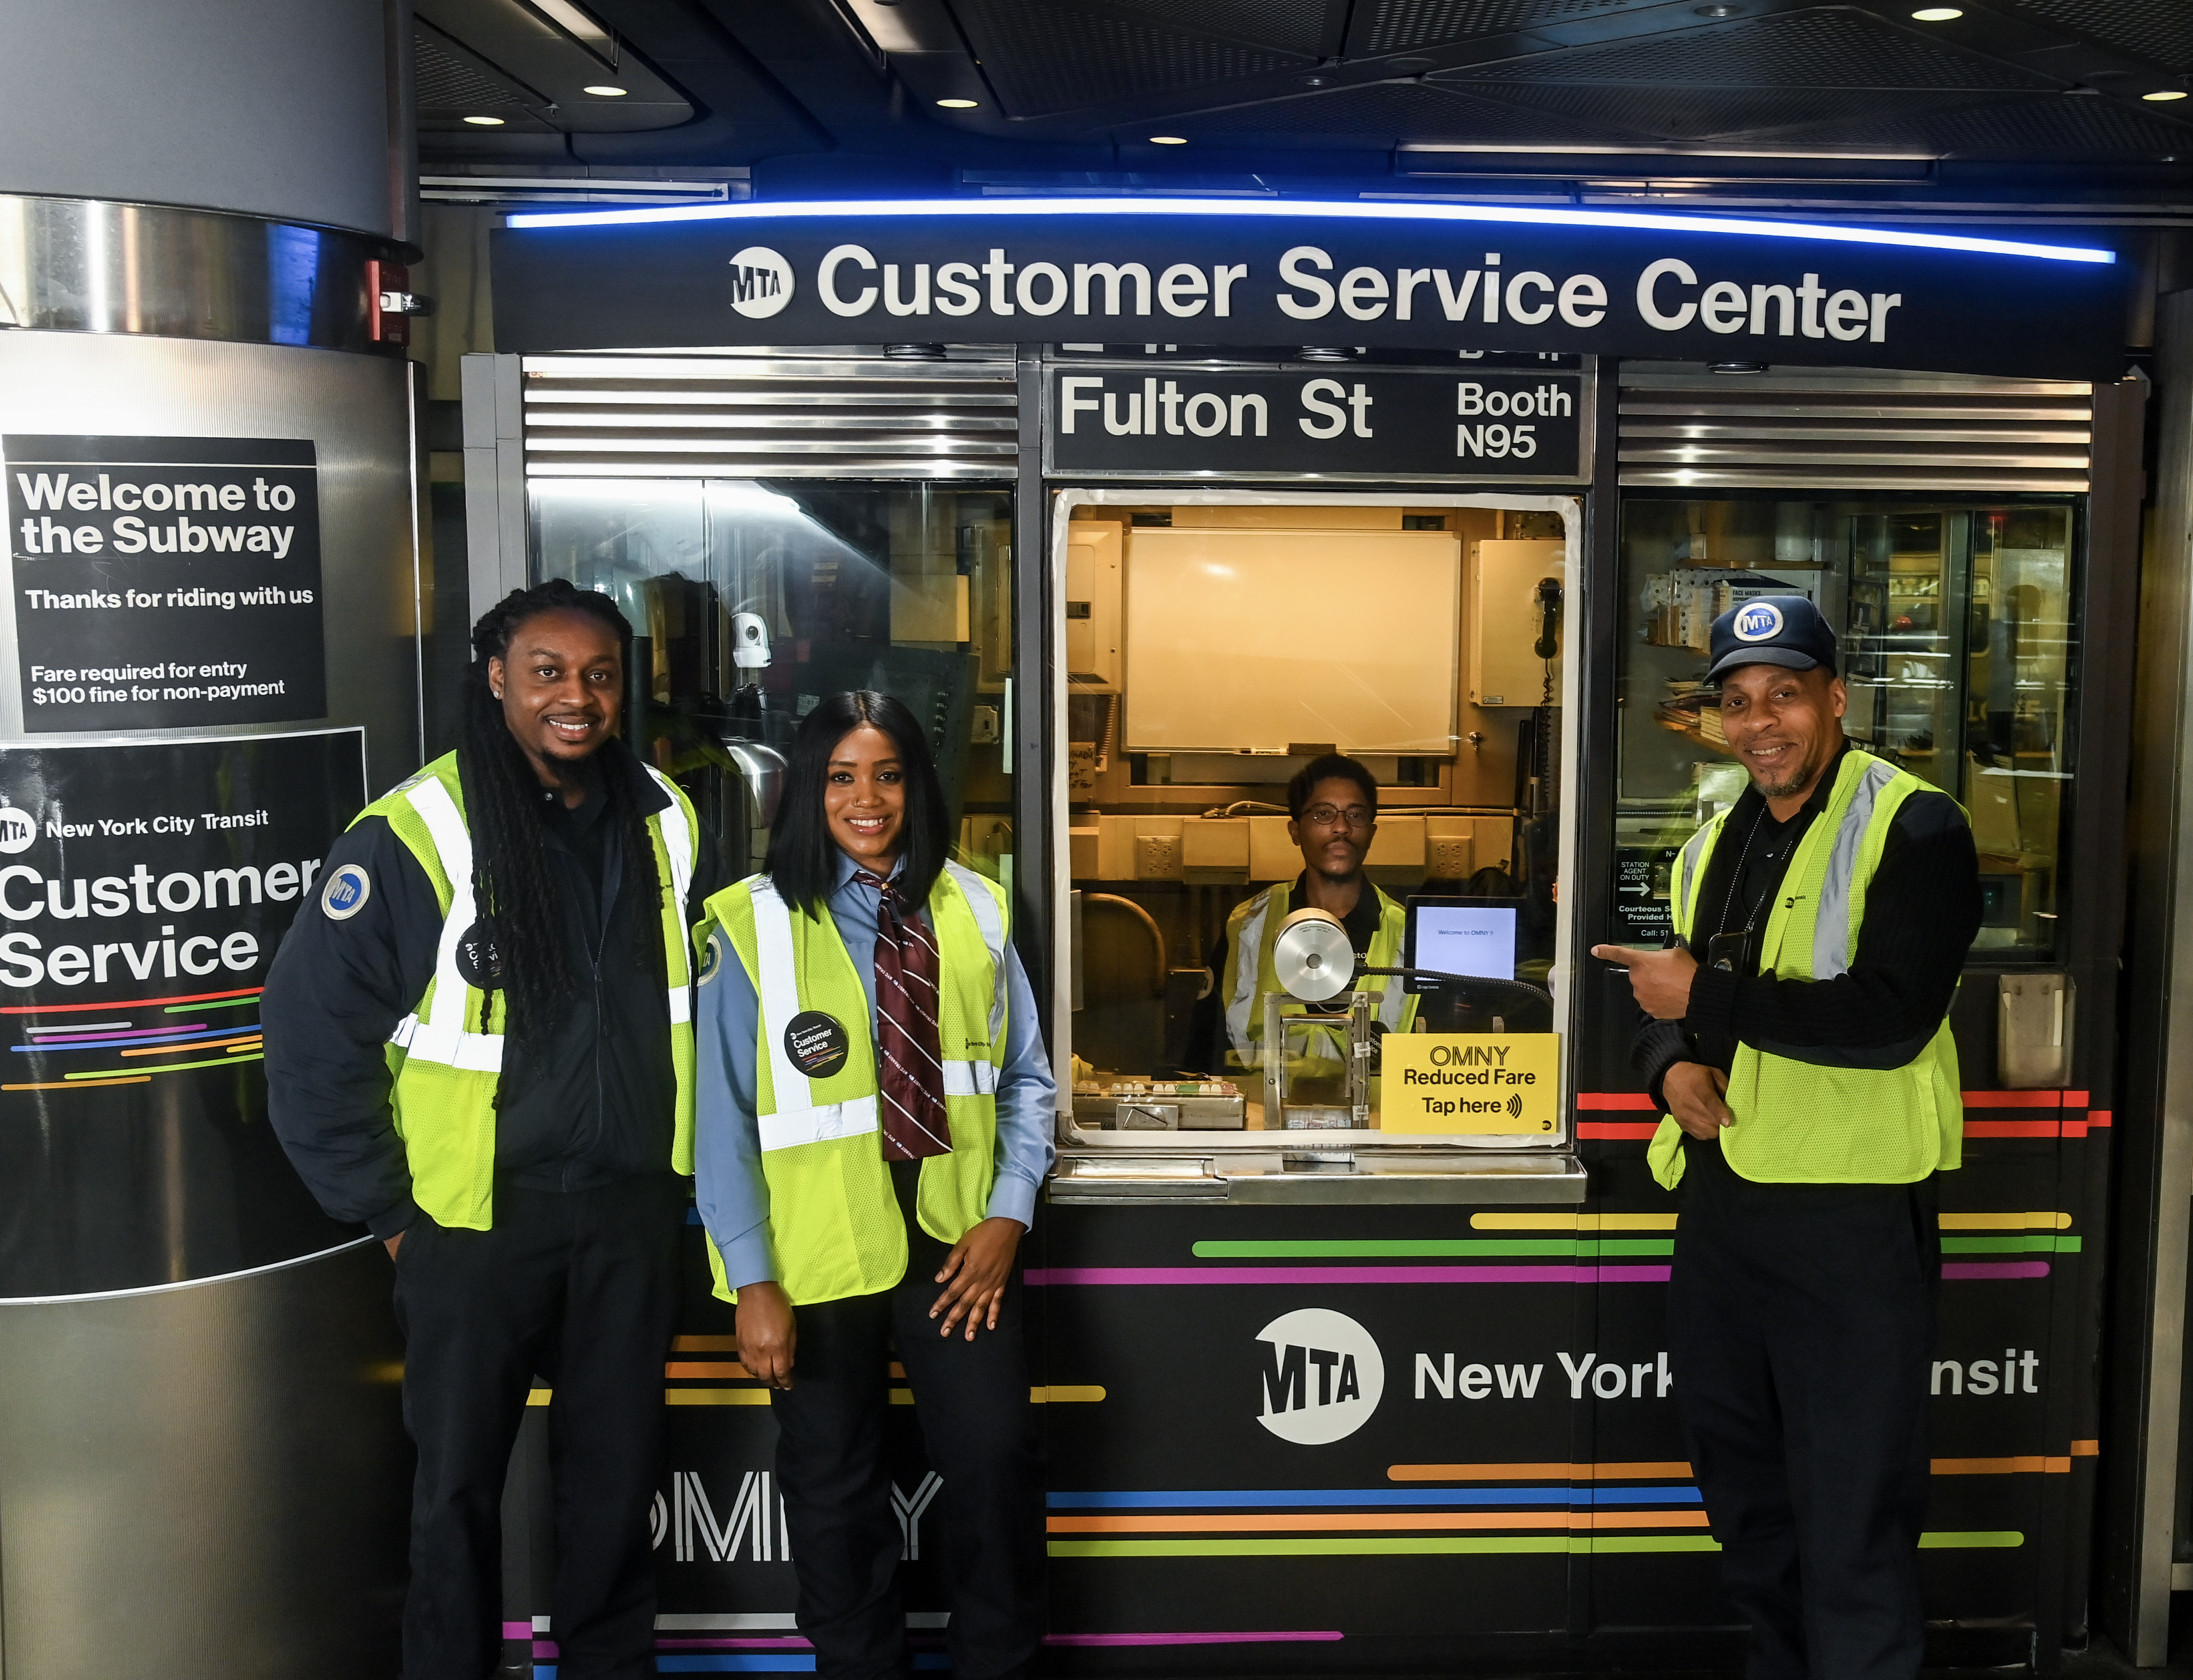 MTA Announces Reduced-Fare MetroCards Now Available for Eligible Customers at All Customer Service Centers